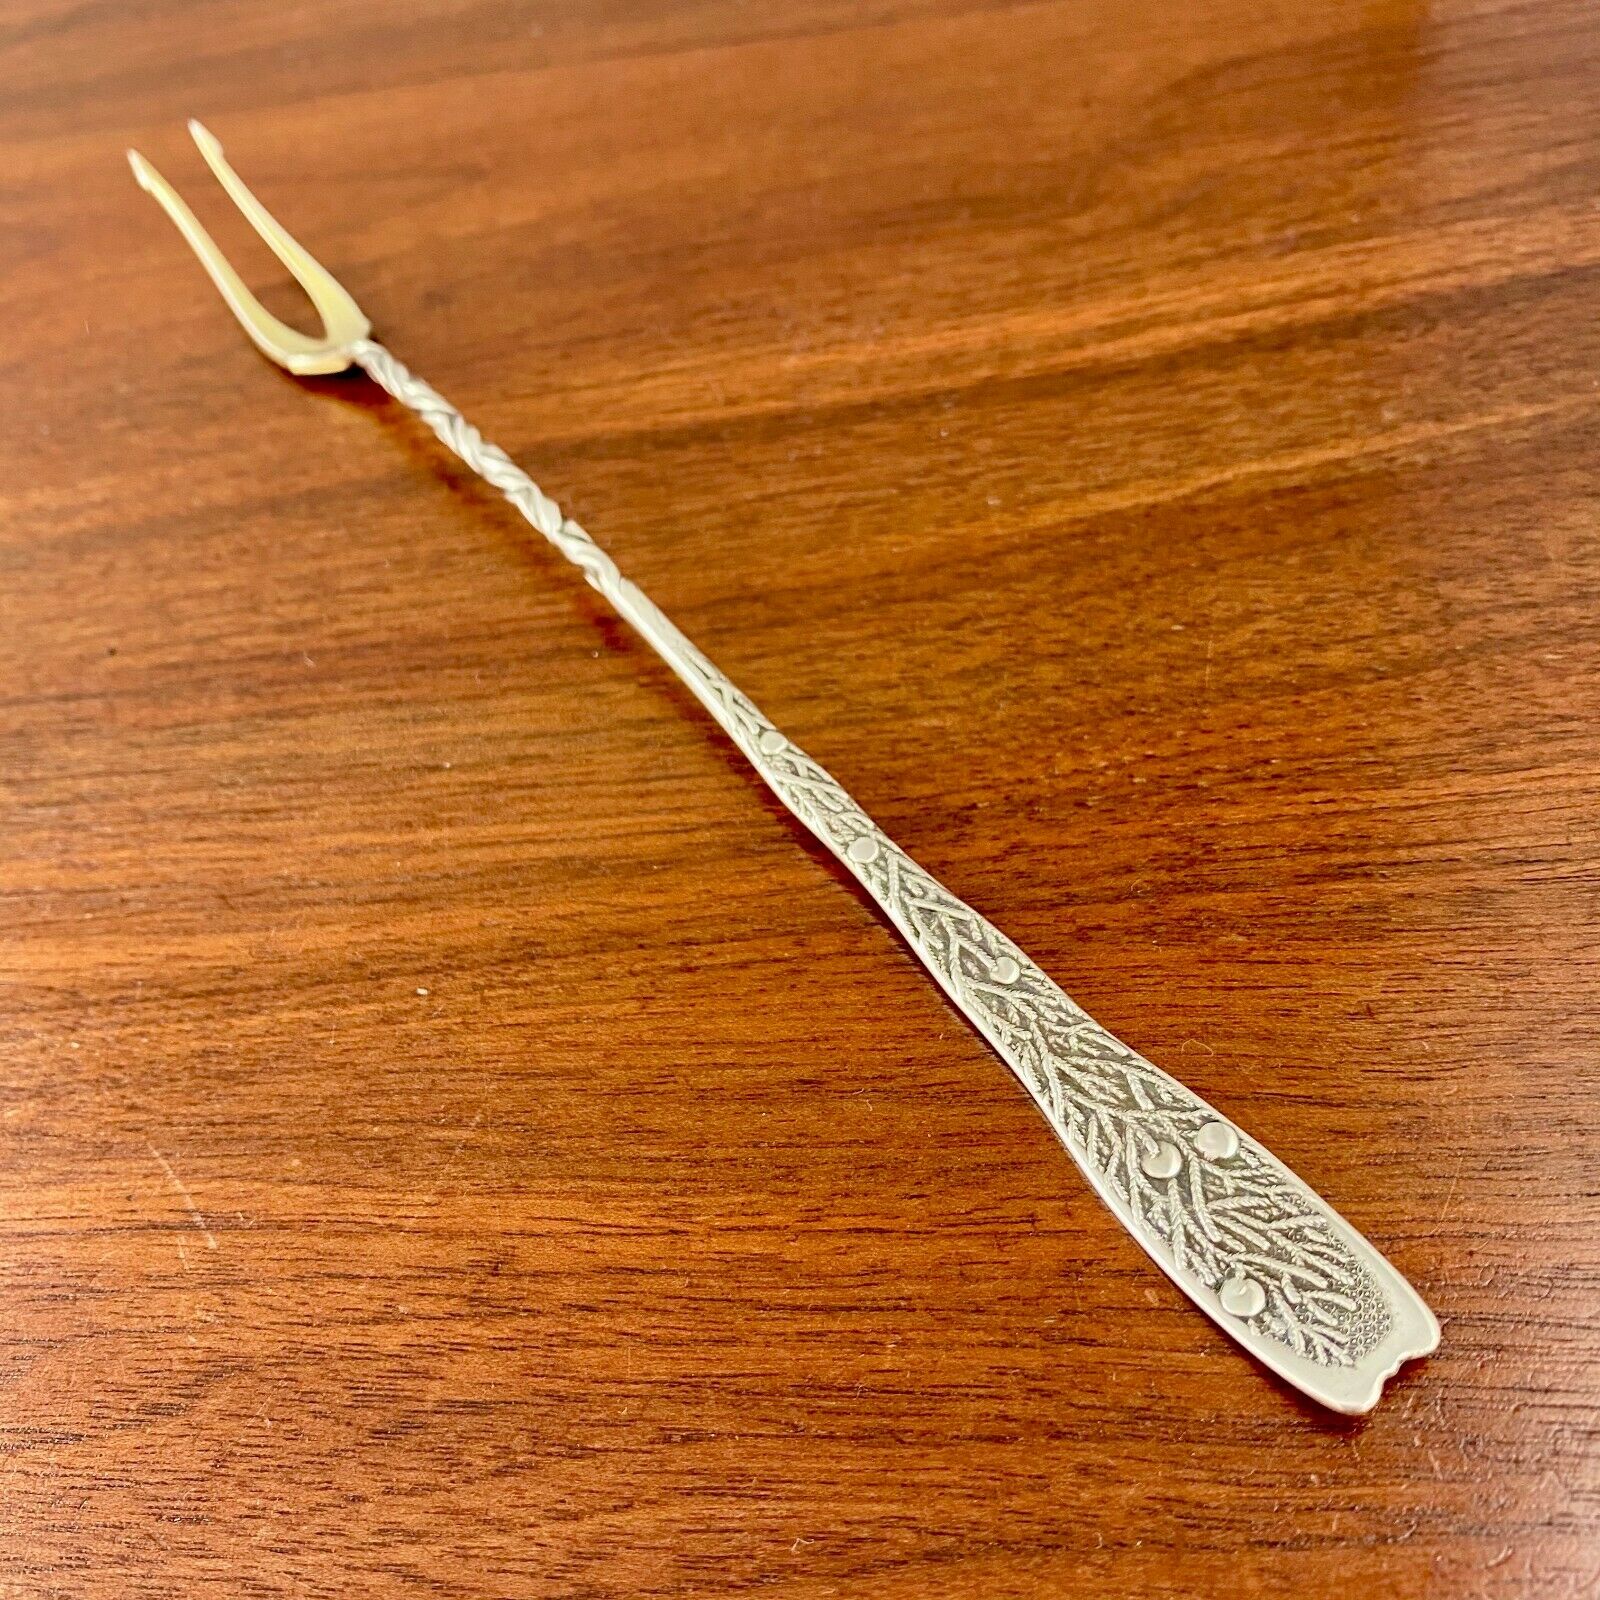 Antique Valuations: WHITING AESTHETIC STERLING SILVER LONG HANDLED OLIVE FORK BERRY 1880 BLUEBERRIES